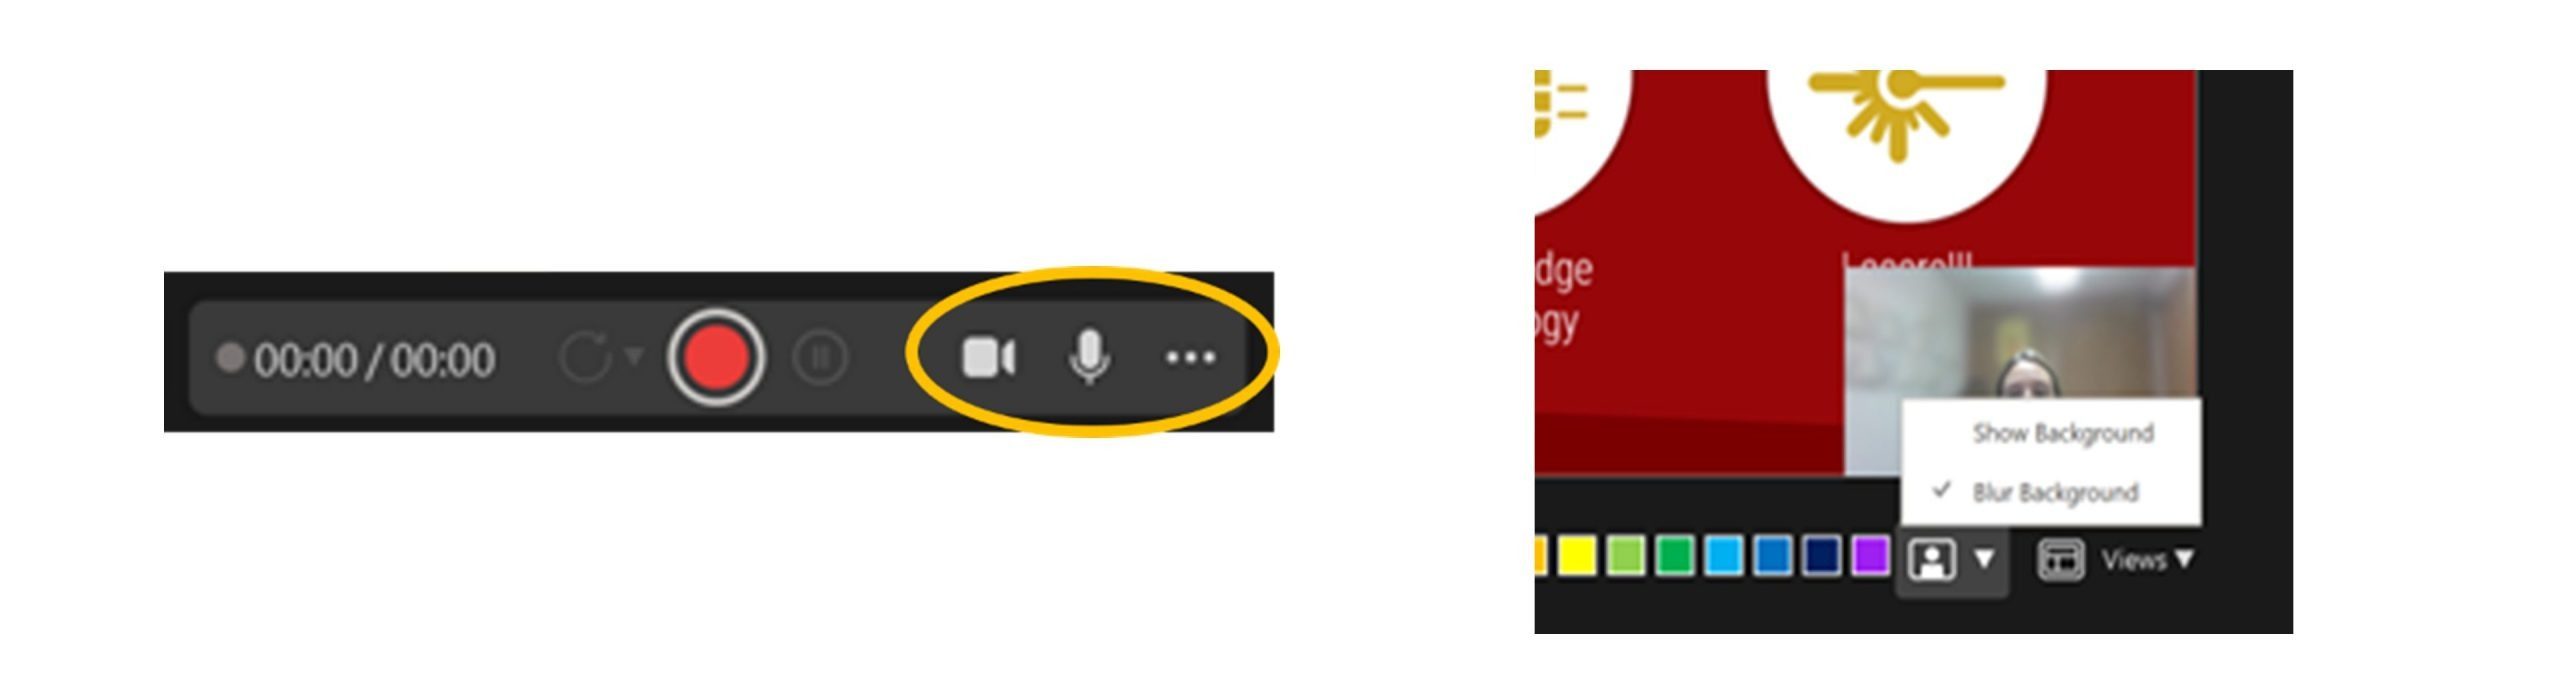 On the left is a small screenshot of the camera and microphone settings from the Record presentation mode in PowerPoint. On the left is a screen shot of the video options (Show/Blur background).